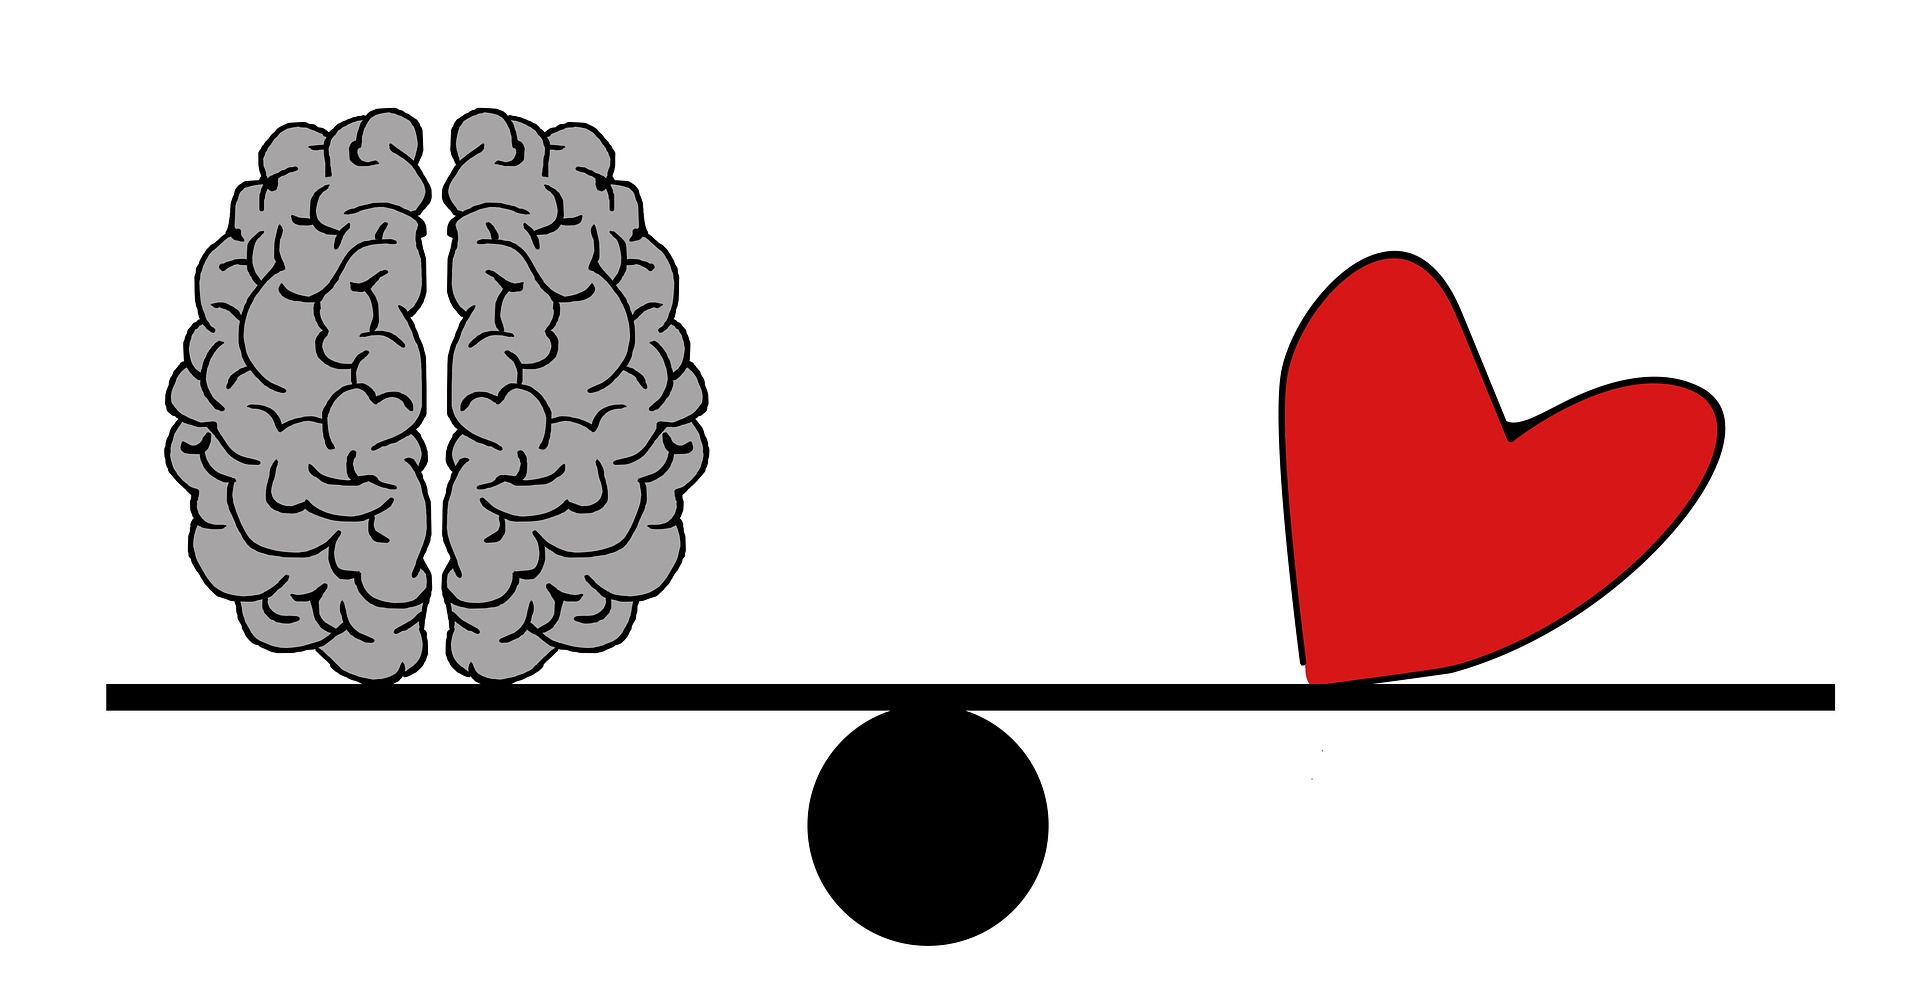 A drawing illustrates the heart and brain as a balancing act